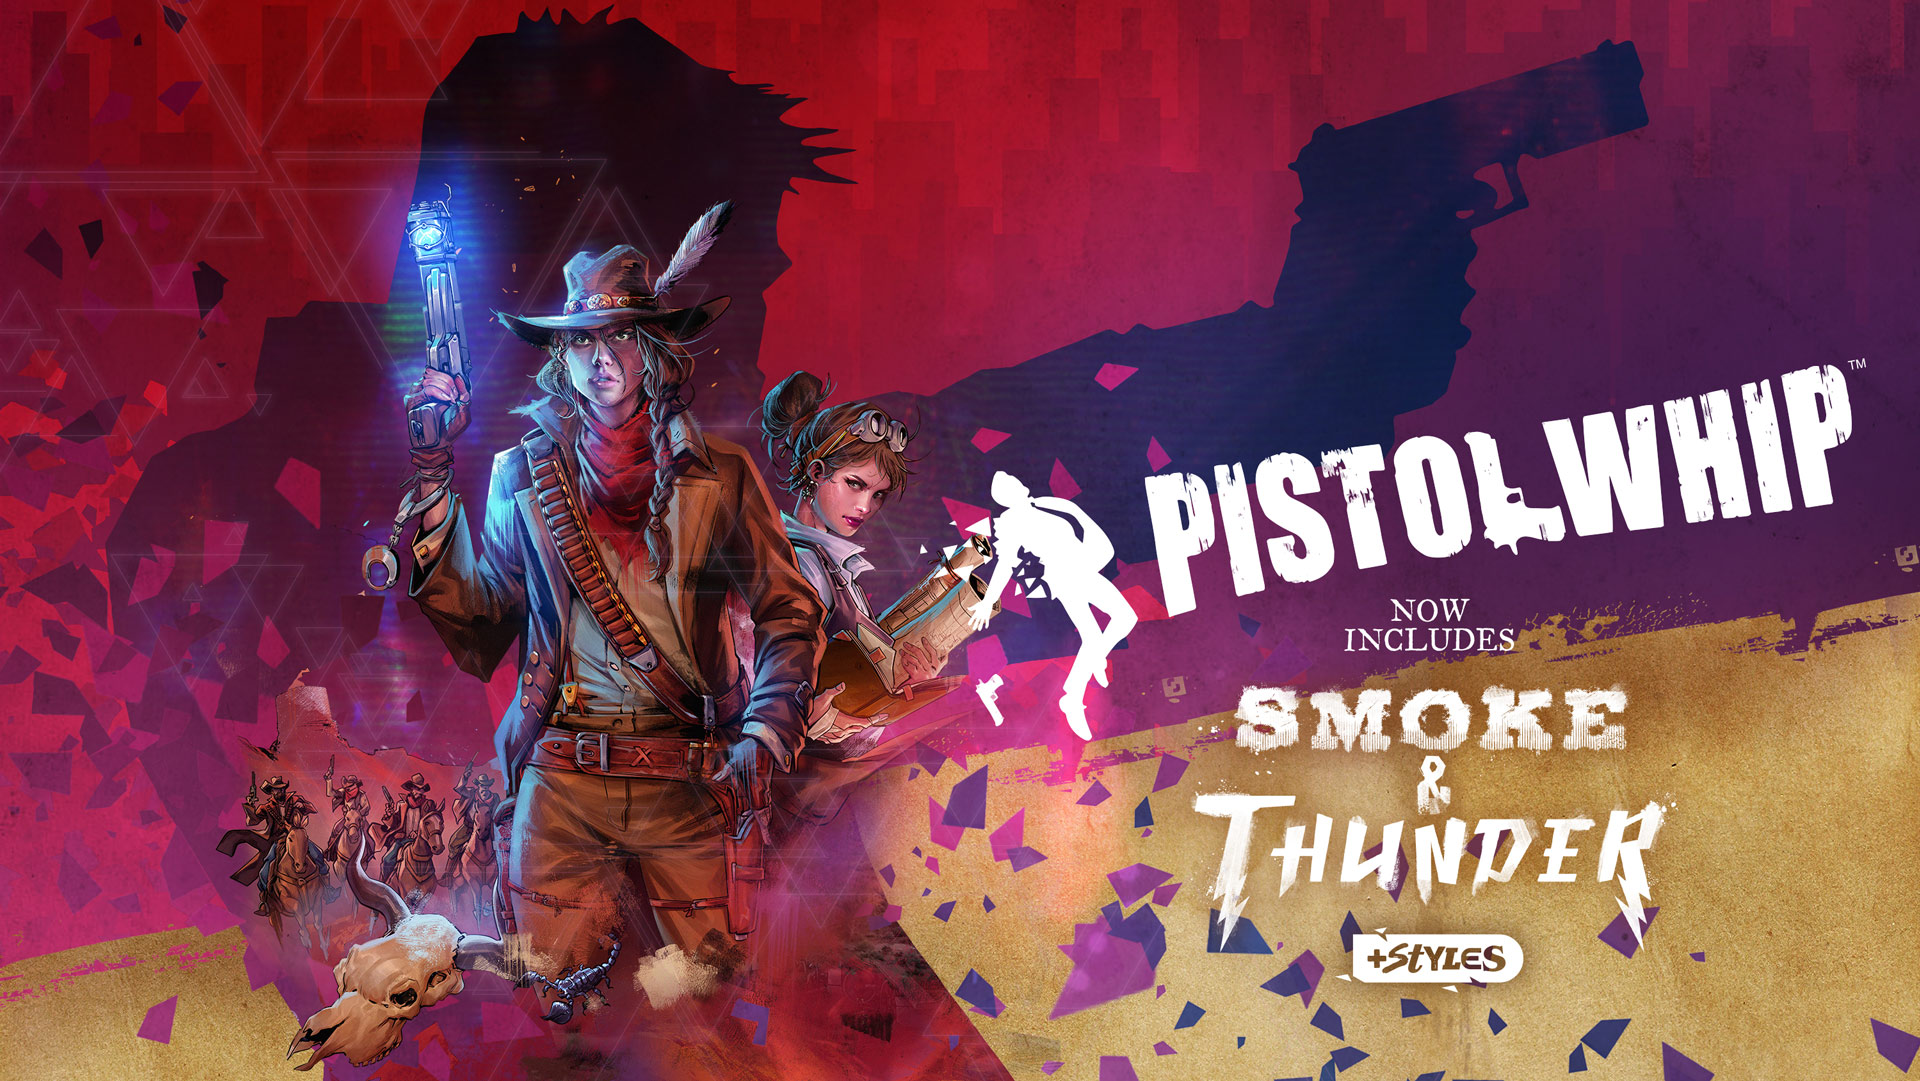 Impressions: ‘Pistol Whip – Smoke & Thunder’ Delivers a Fresh Dose of Gun-slinging Fun